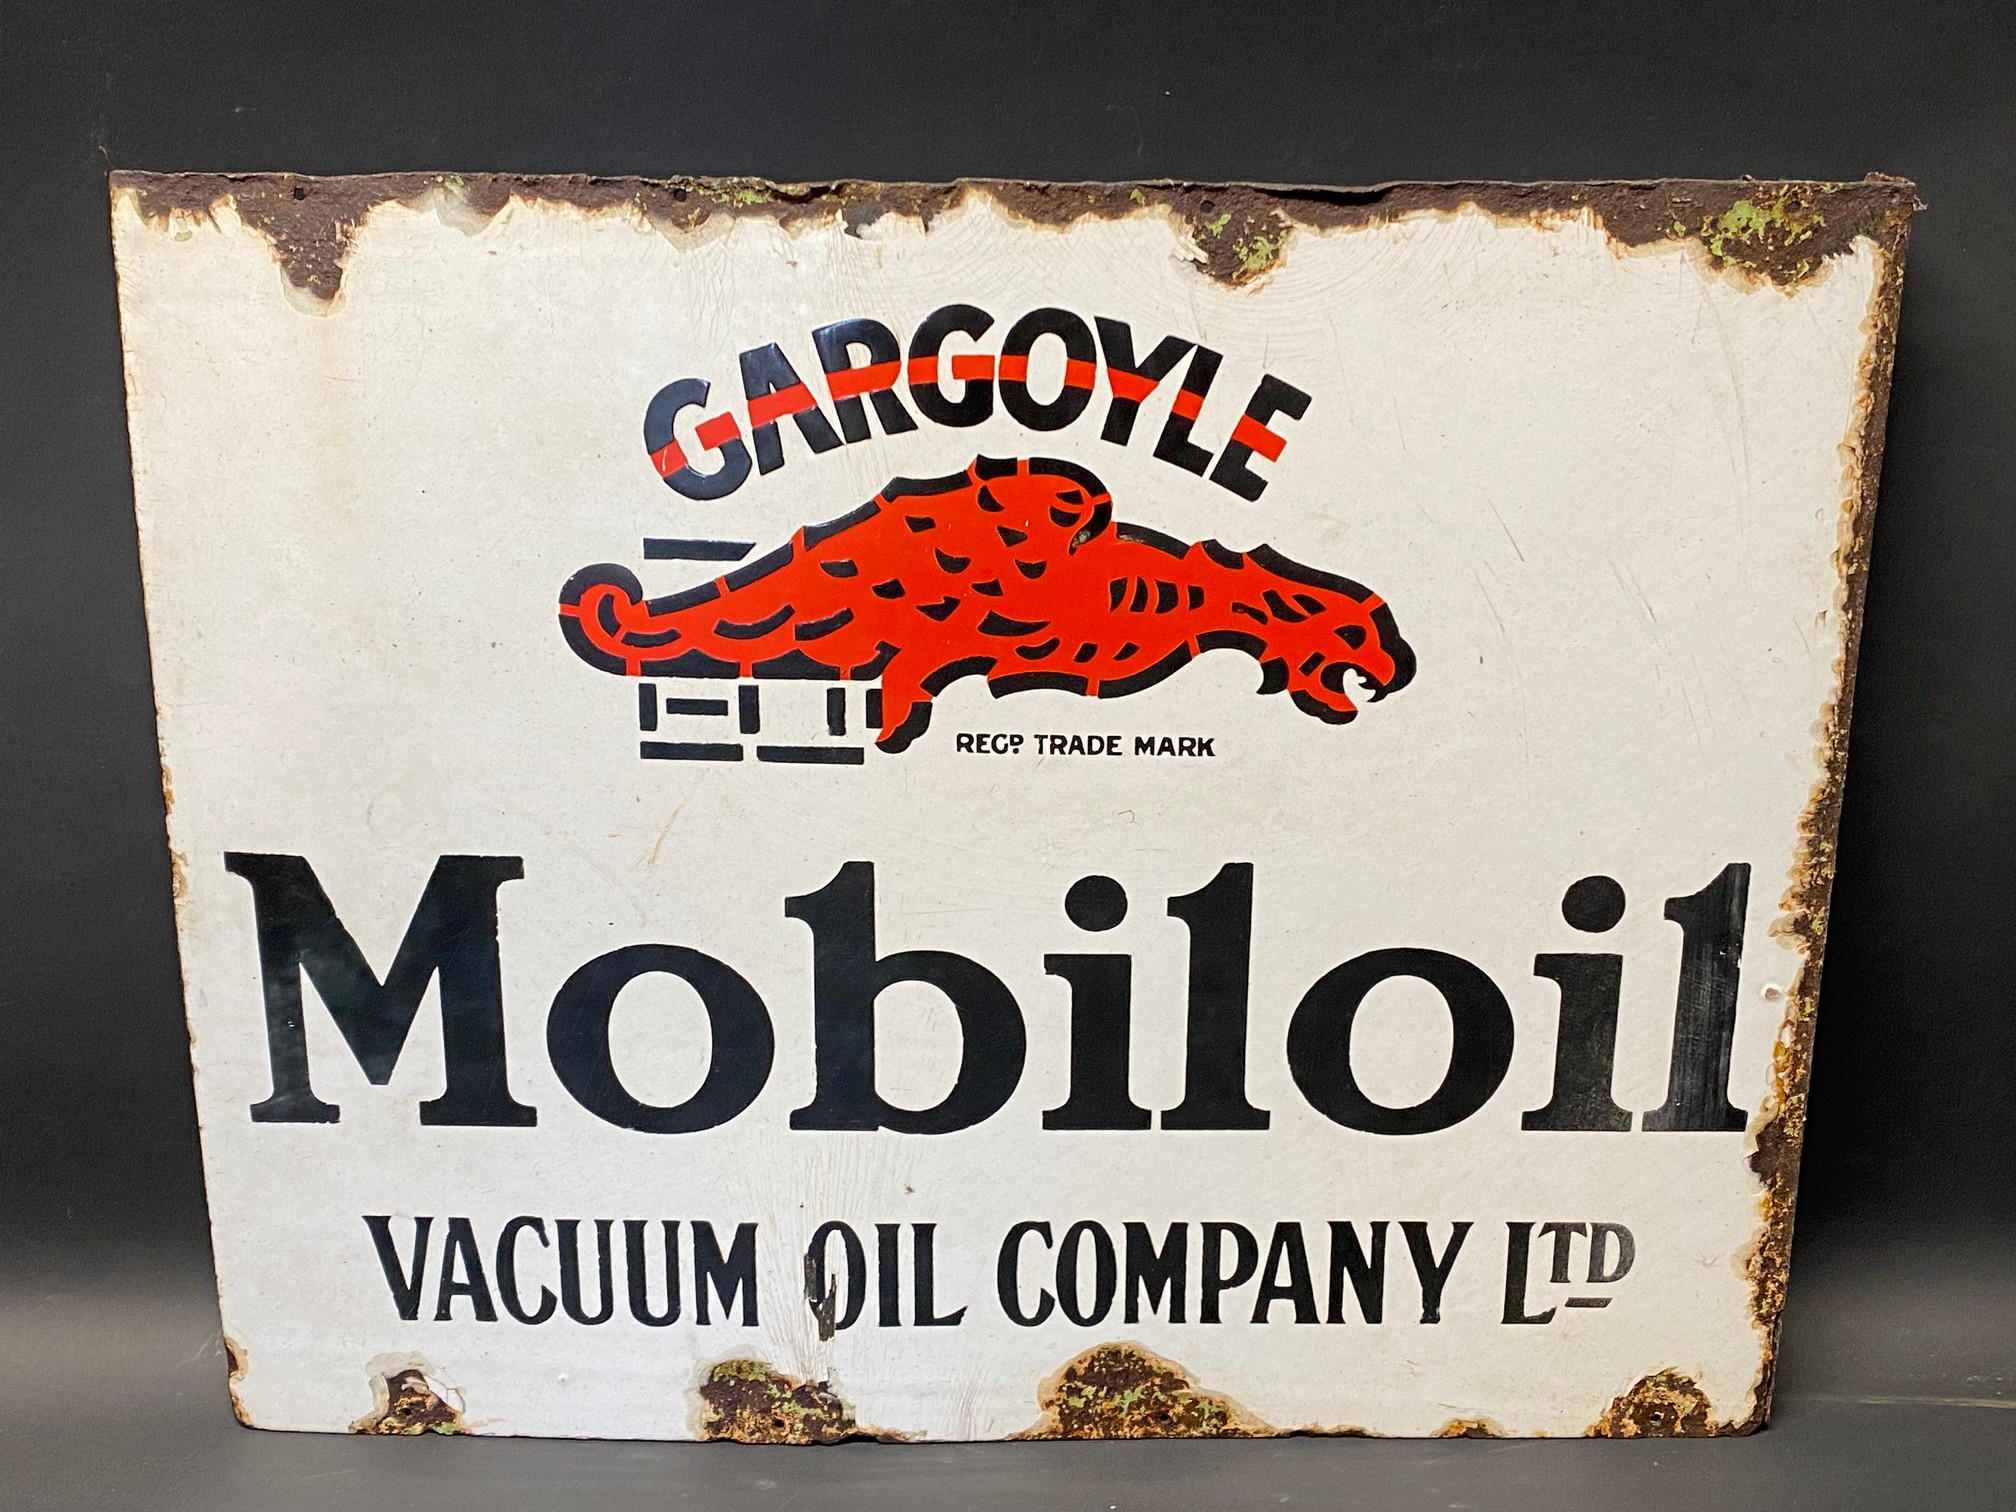 A Gargoyle Mobiloil double sided enamel sign with hanging flange, 20 x 16". - Image 2 of 2